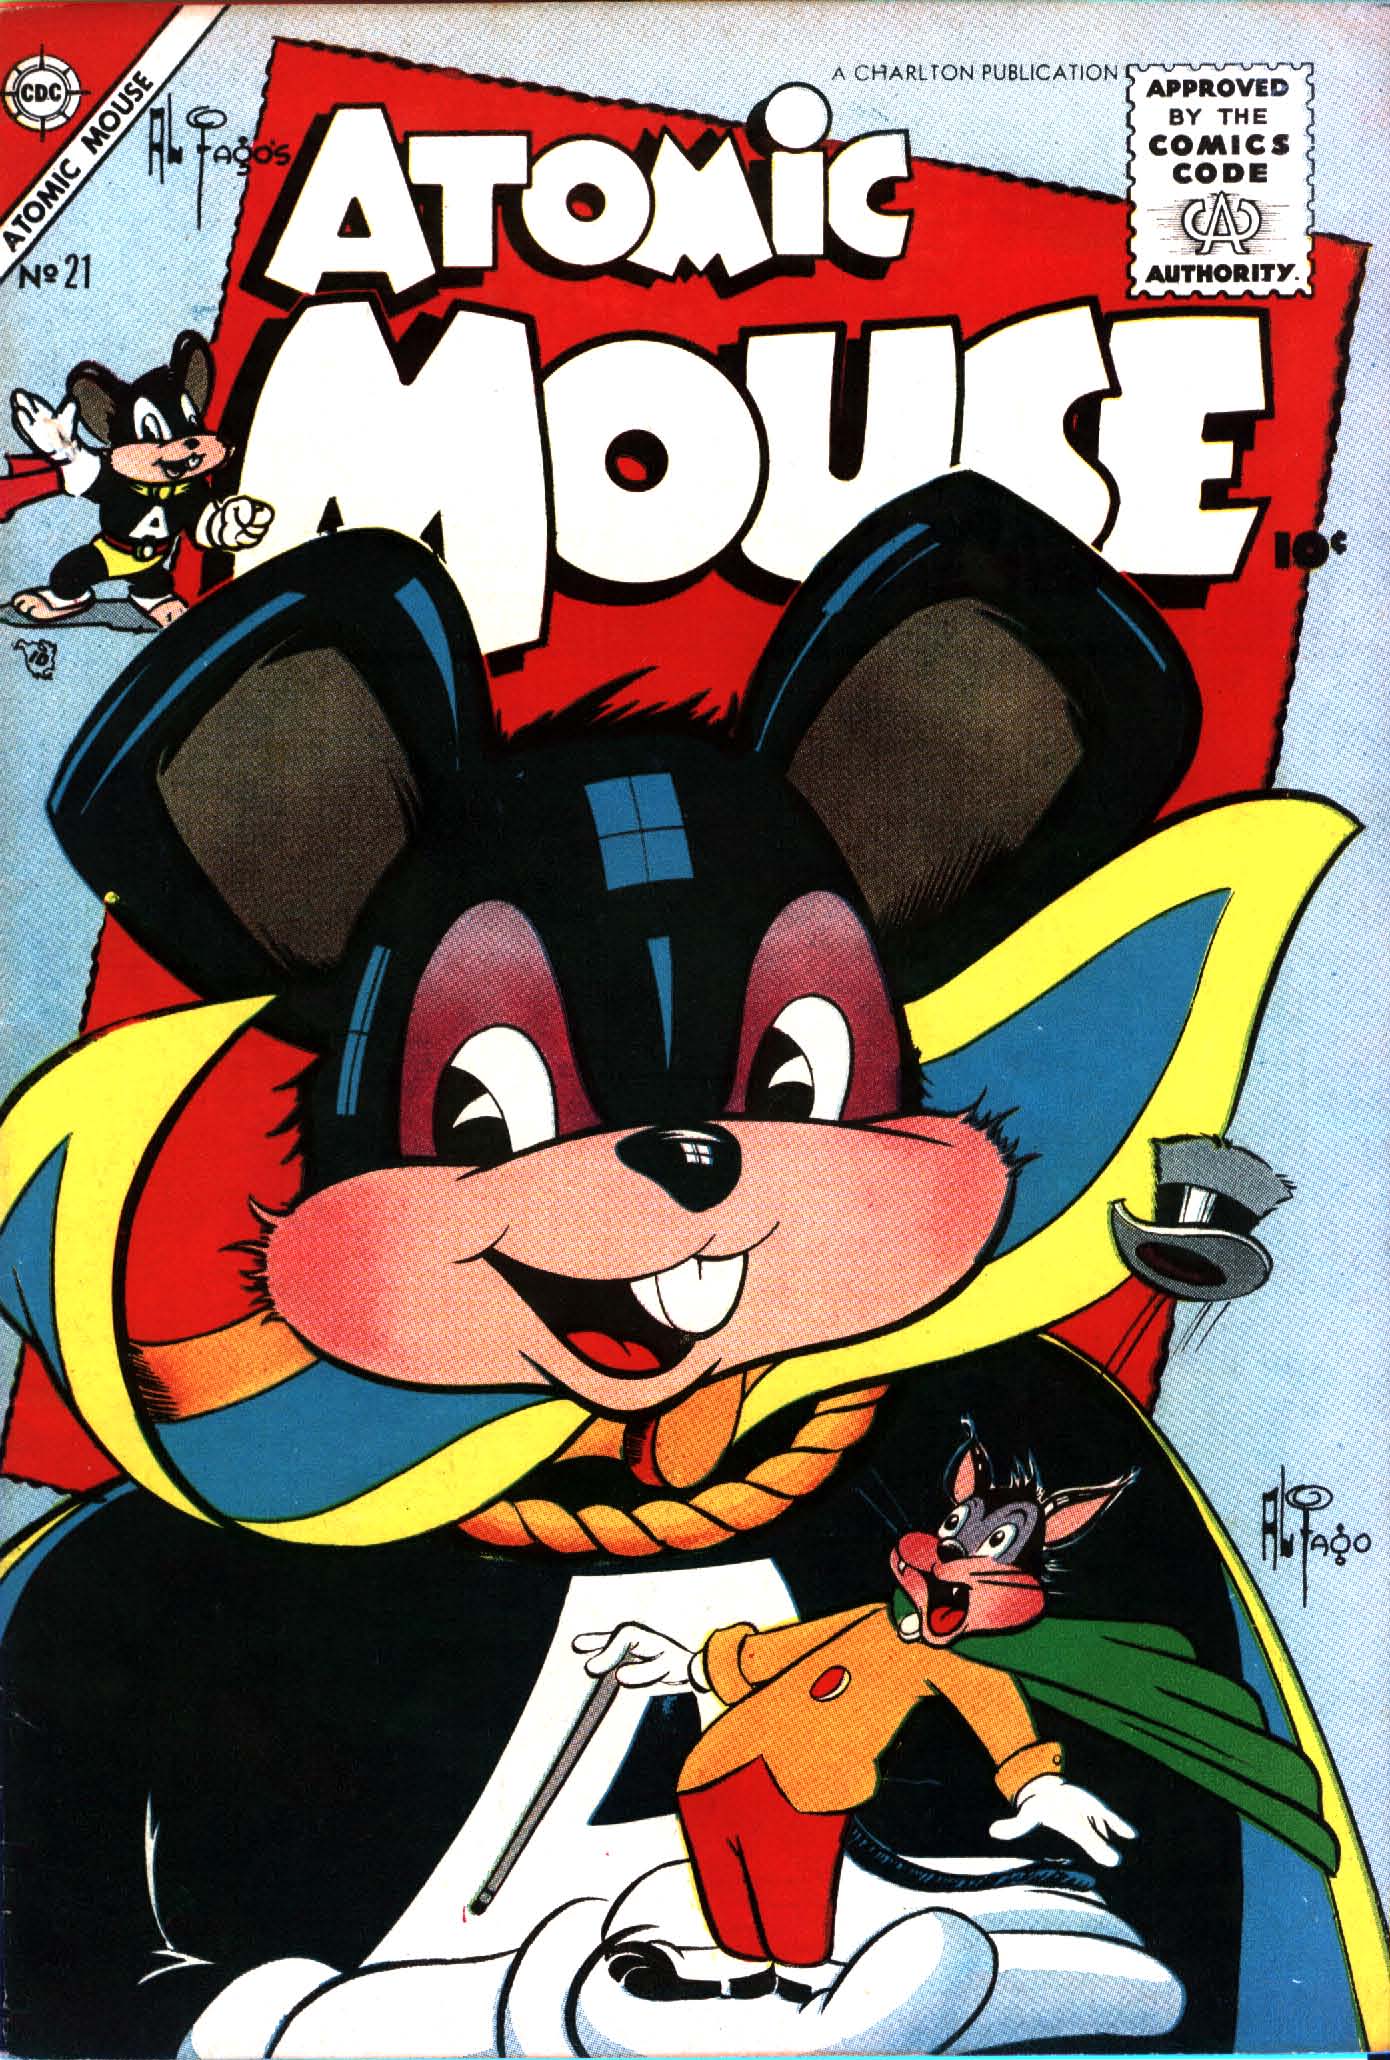 Atomic-Mouse--13